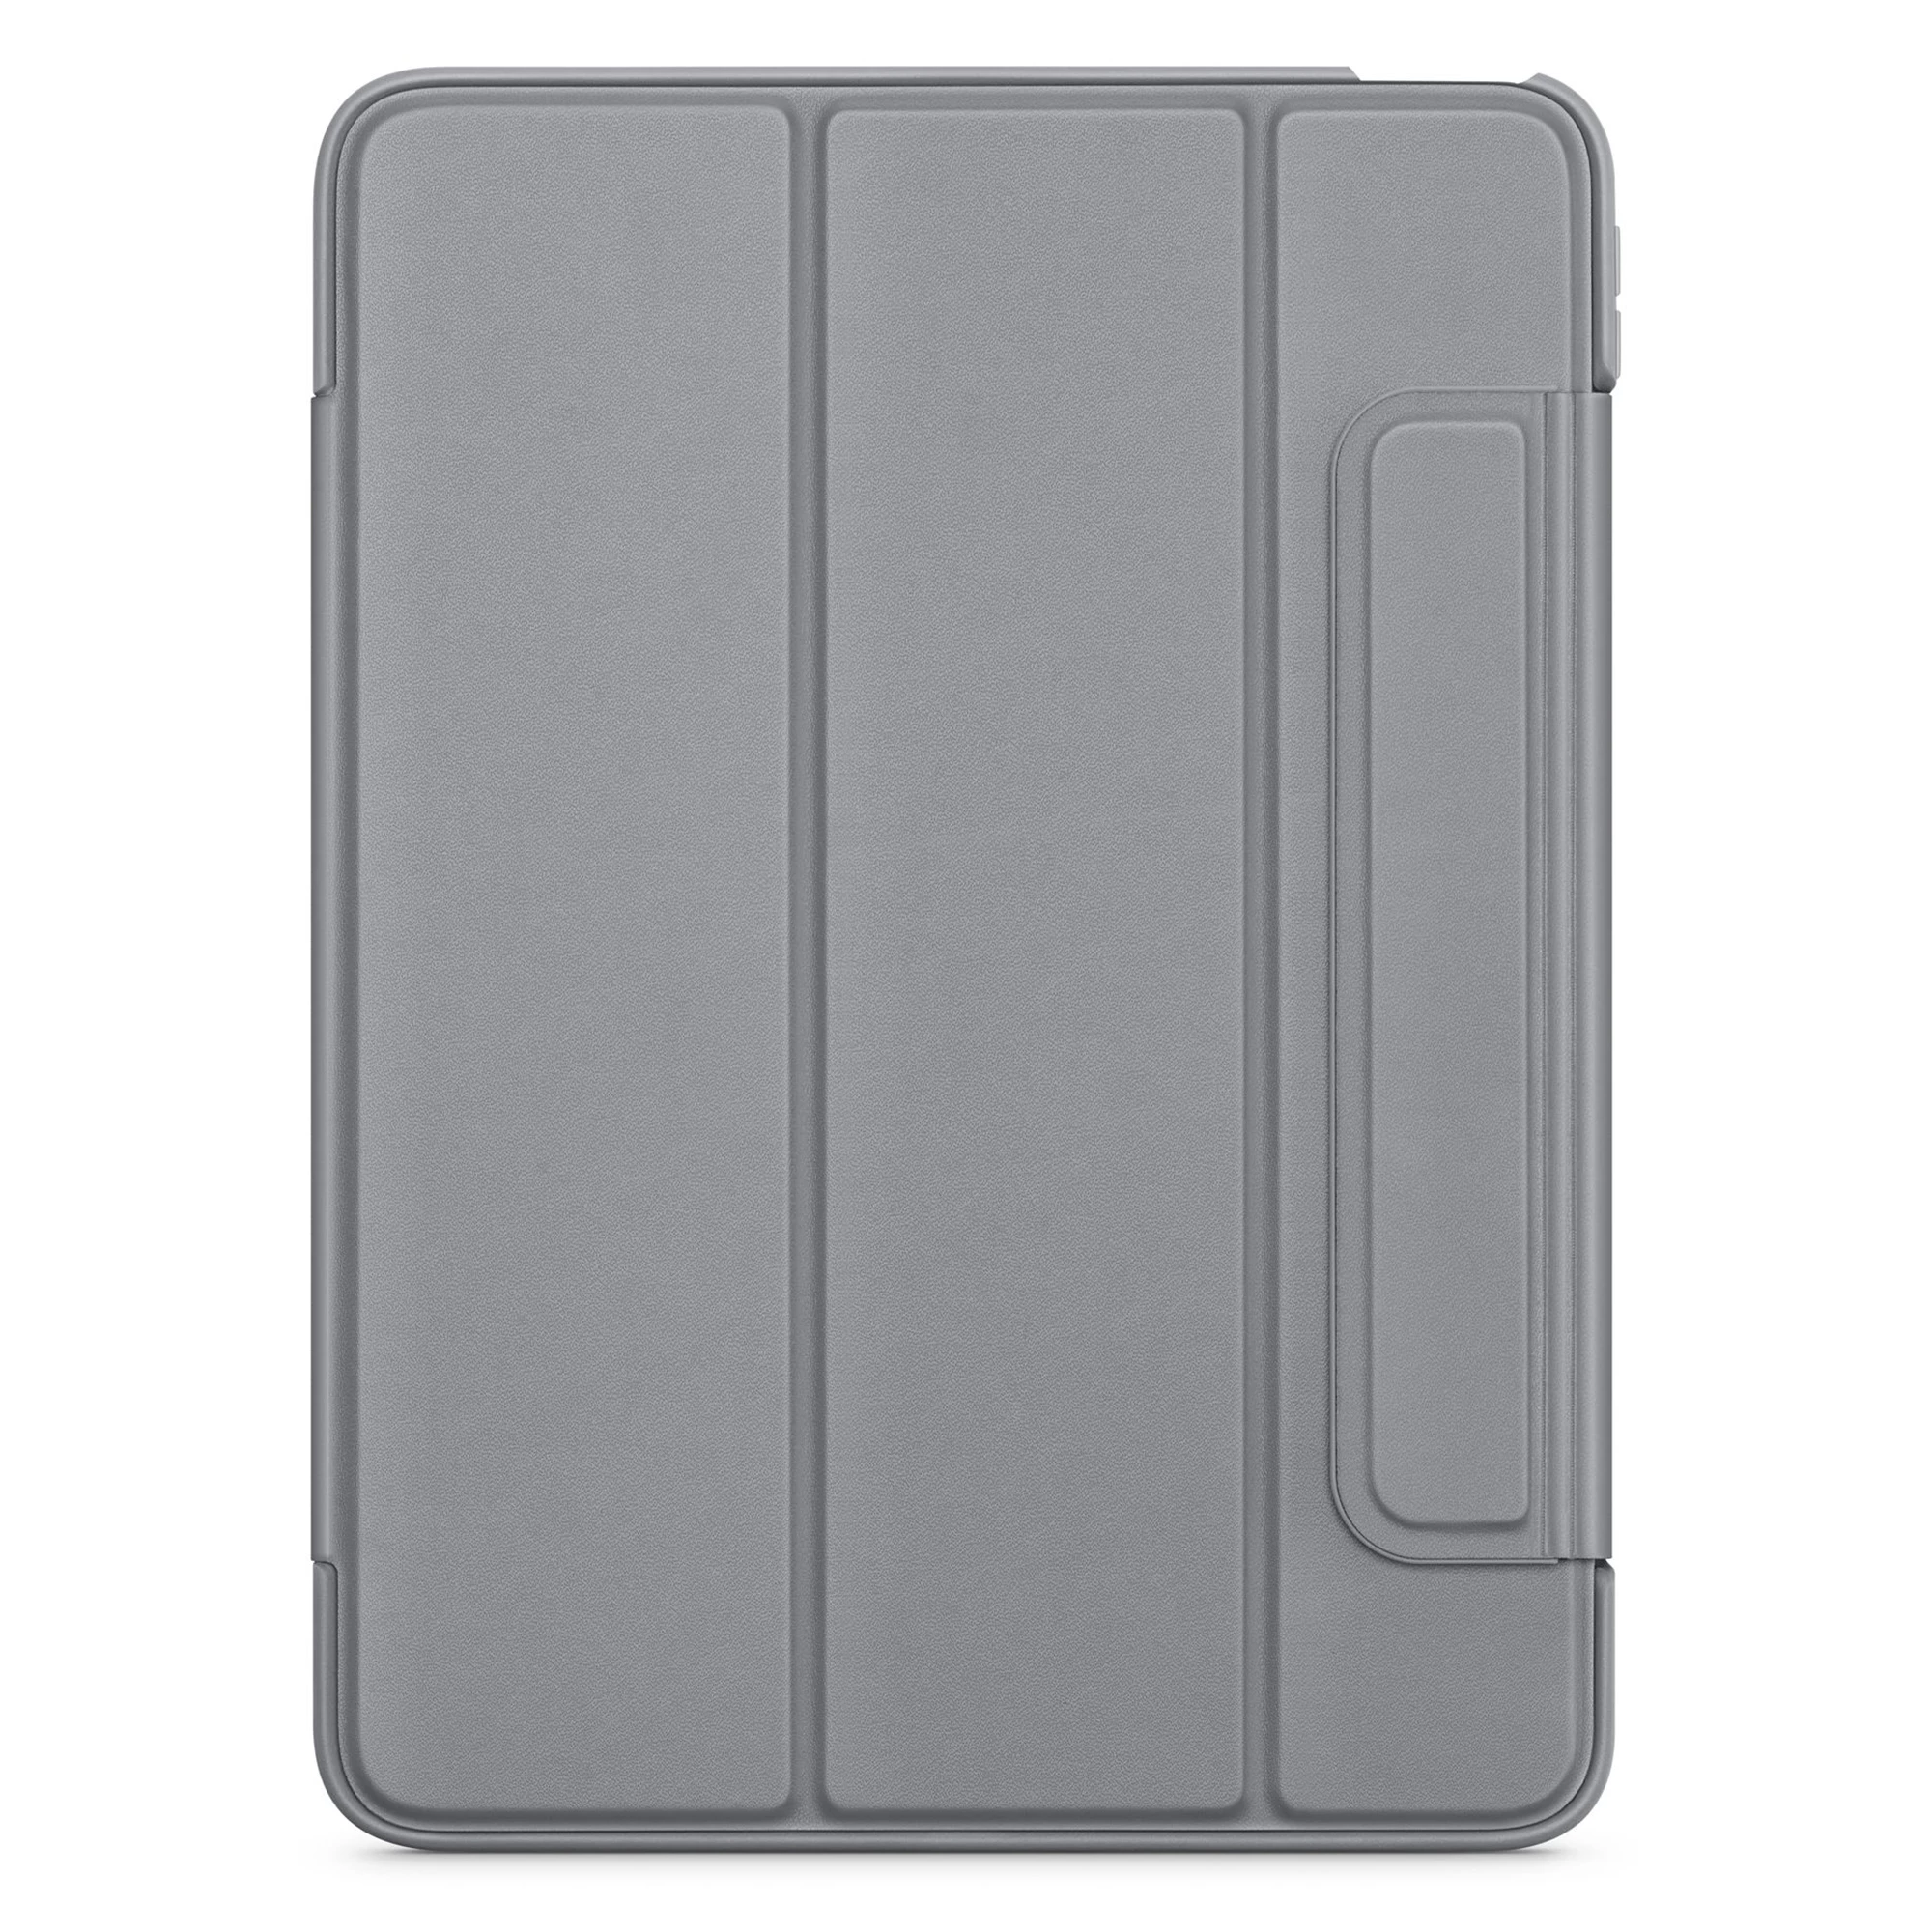 OtterBox Symmetry Series 360 Folio Case for iPad Air (4th and 5th generation) - Gray (HPBA2)